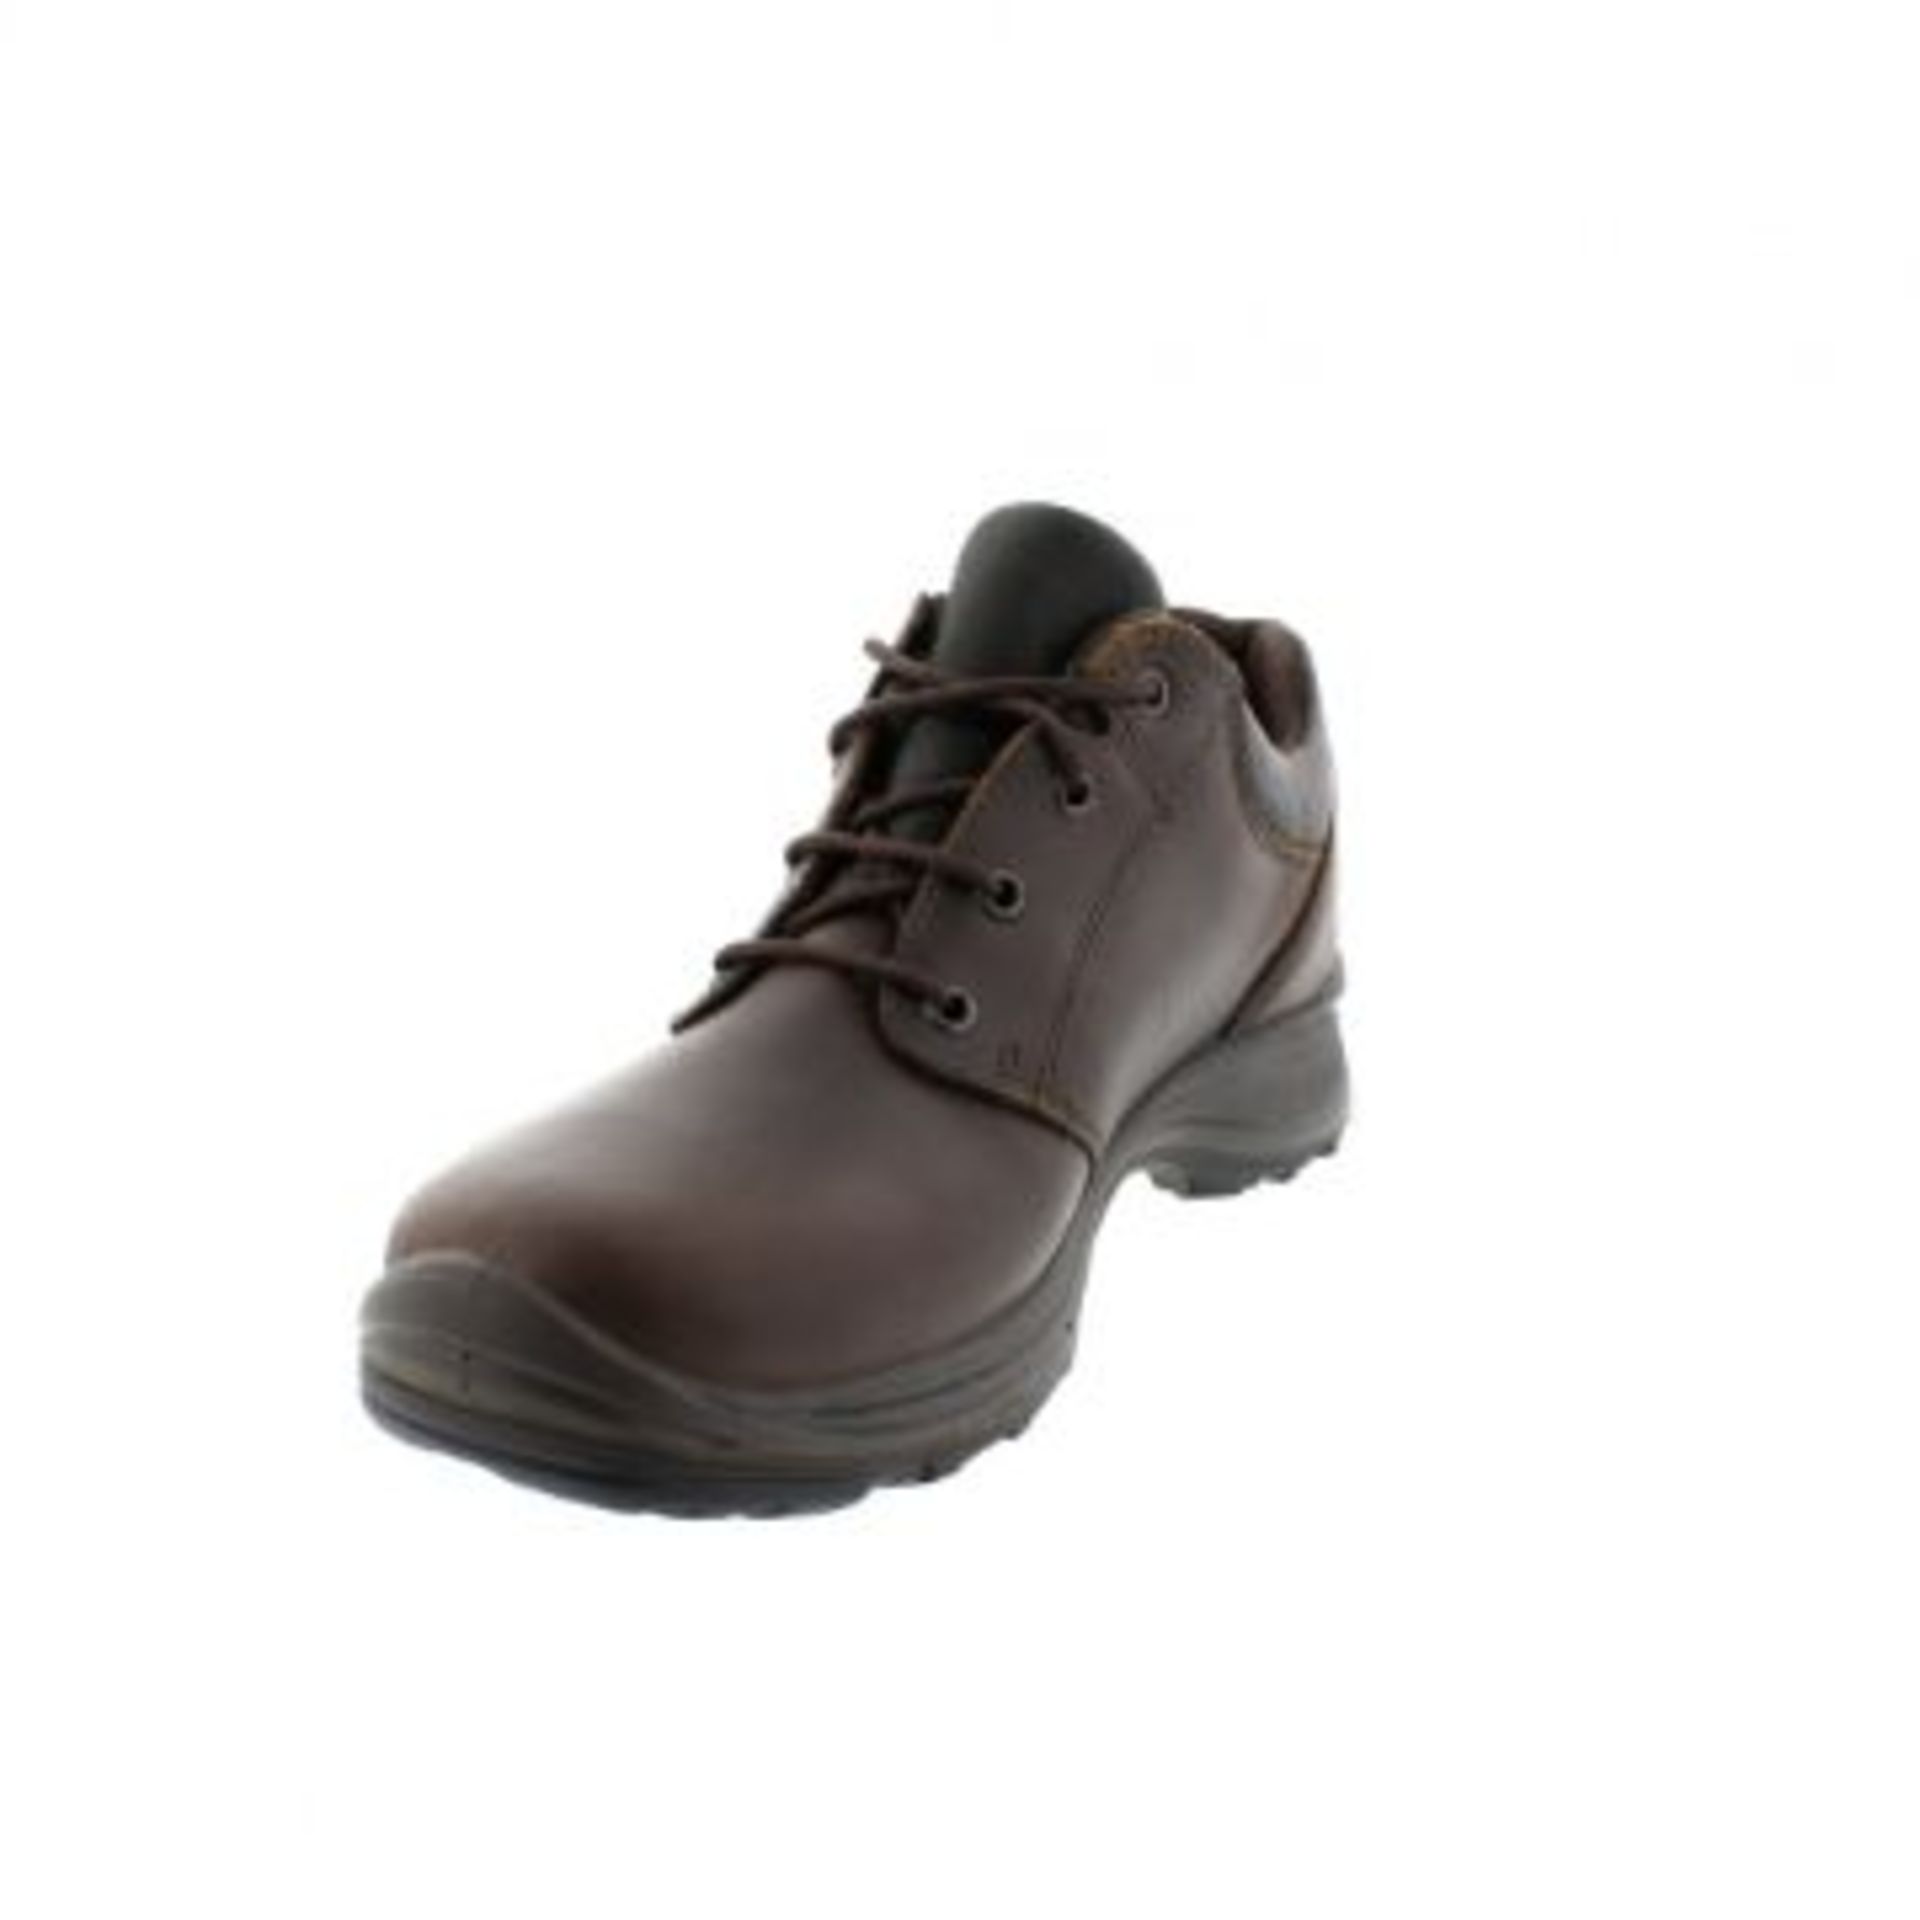 1 x Pair of Men's Grisport Brown Leather GriTex Shoes - Rogerson Footwear - Brand New and Boxed - - Image 5 of 6